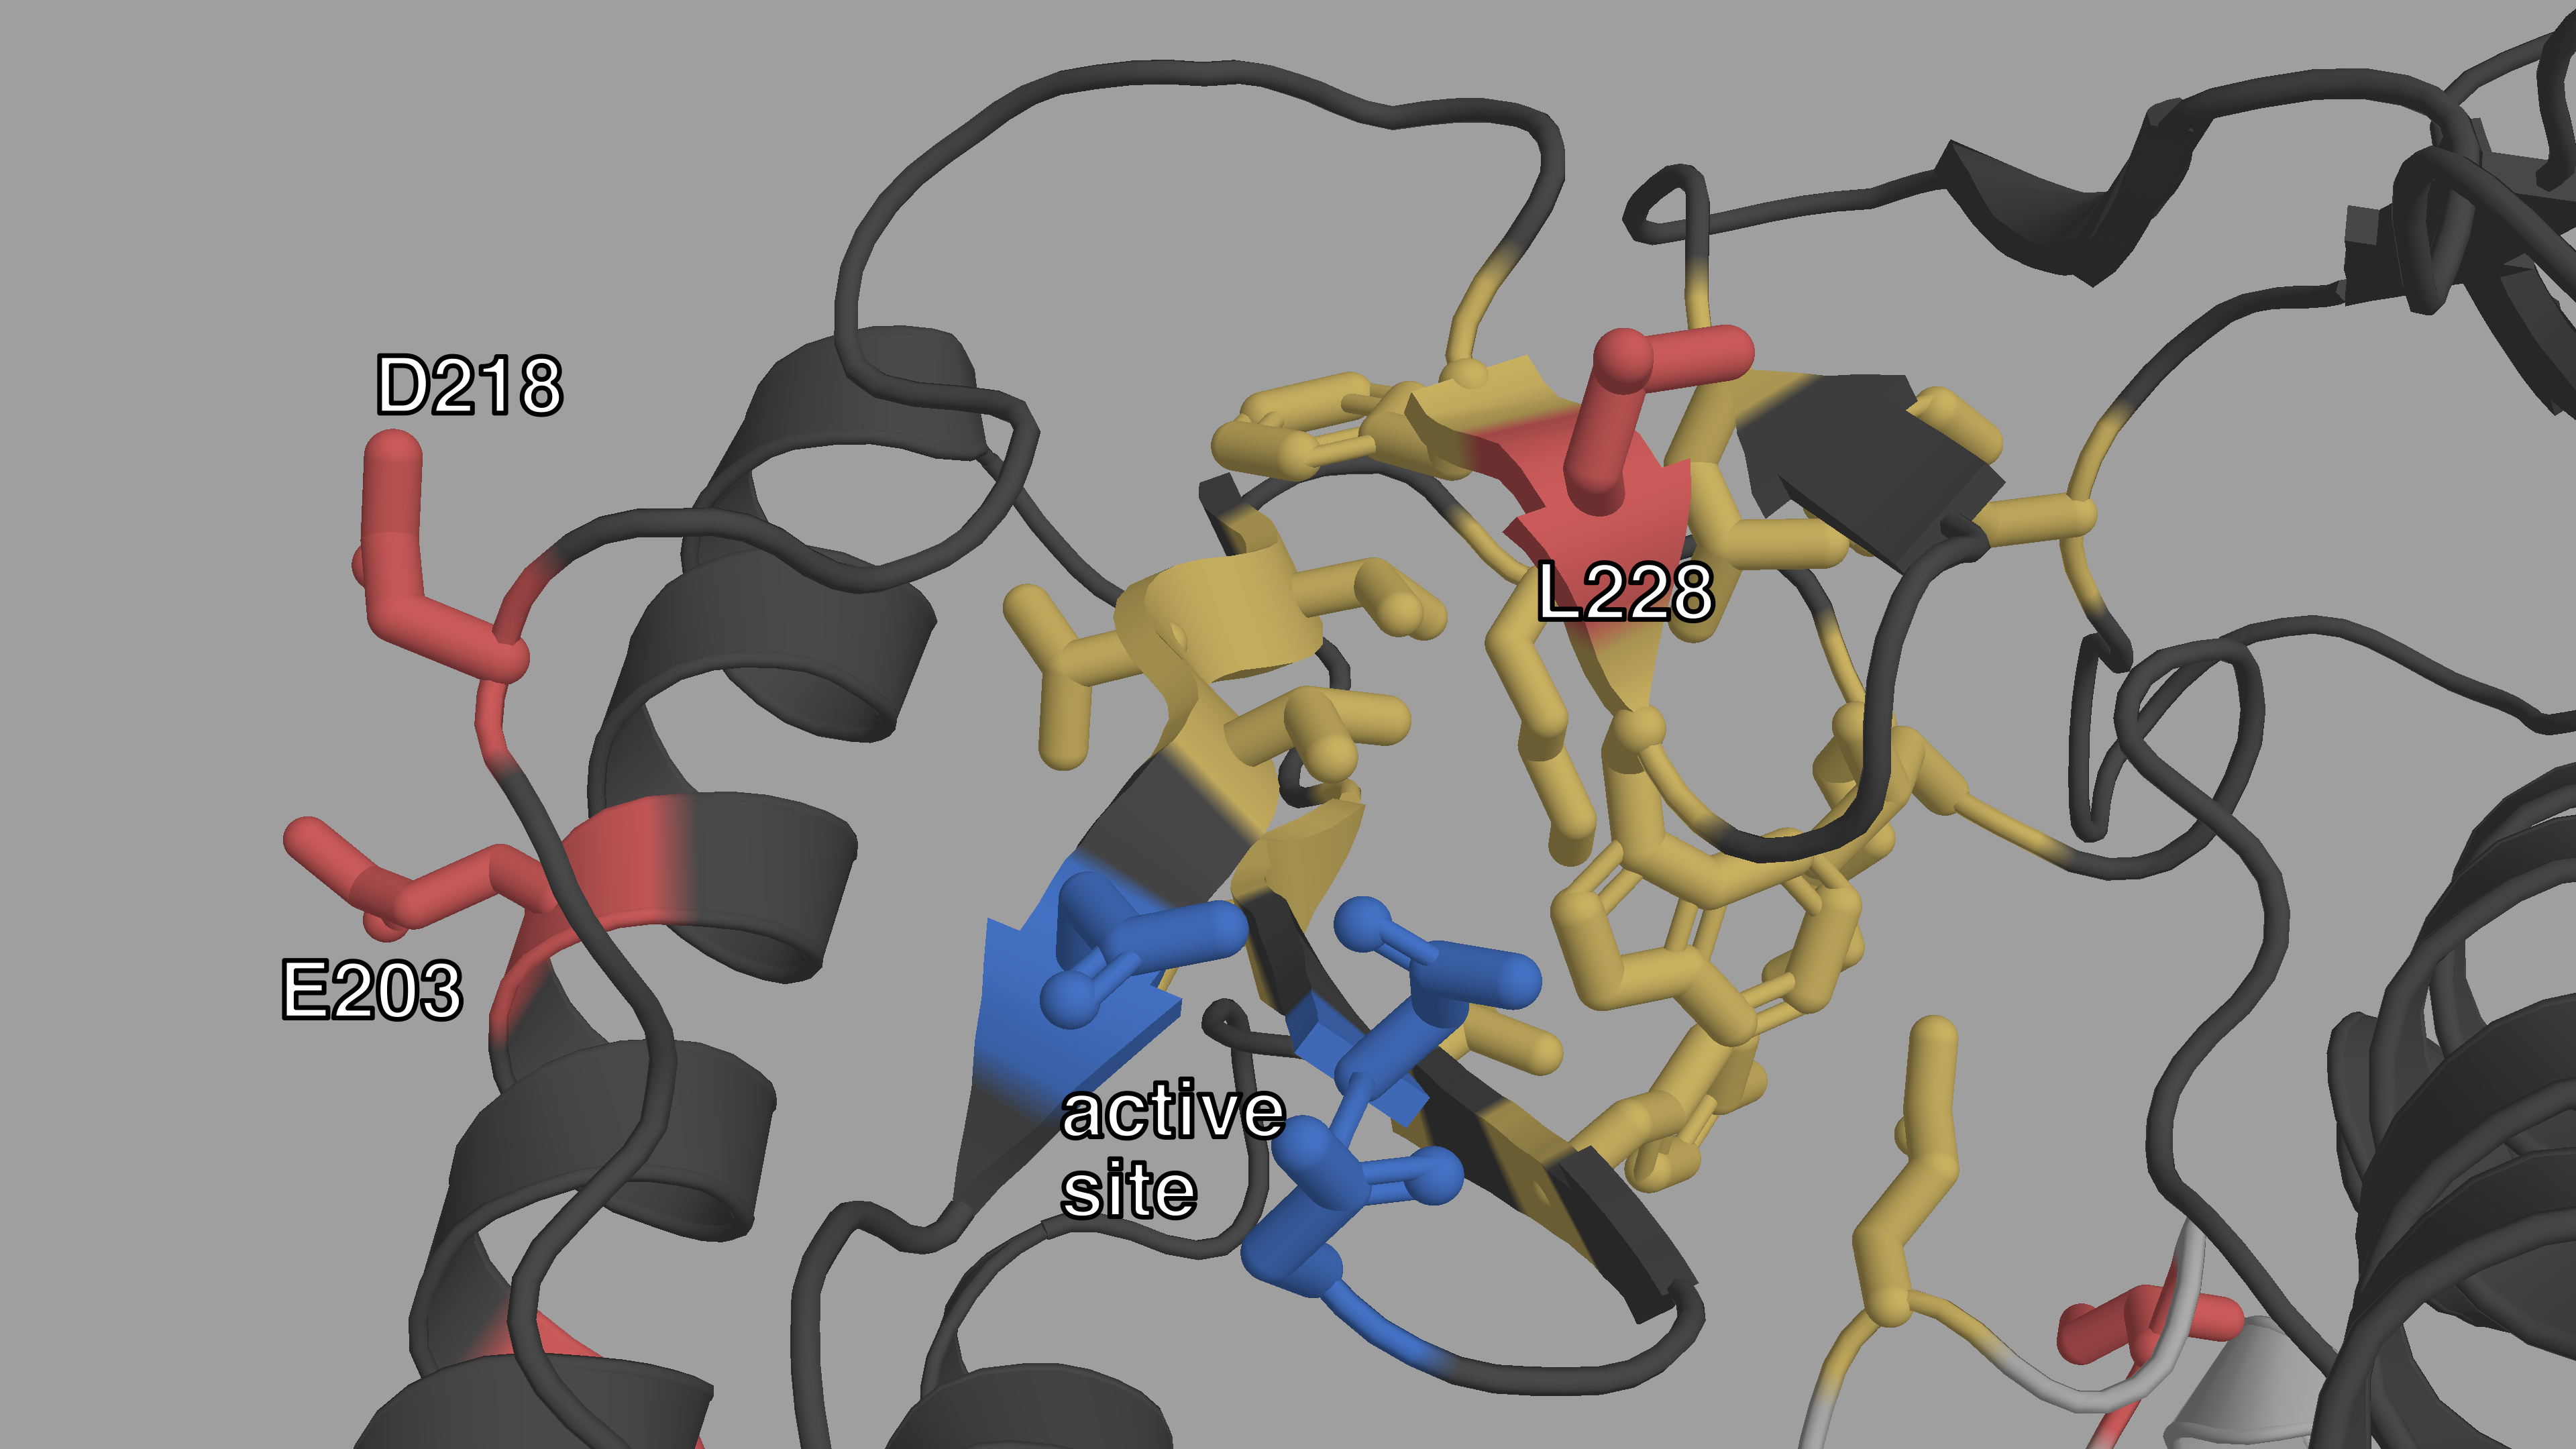 **Closeup structural view of the active site of HIV-1 RT.**  
The p66 subunit is colored in dark gray, the p51 subunit in light gray. The
active site is highlighted in blue. The NNIBP is colored in yellow.
L228, E203 and D218 (red) are also very close on either side of the
active site.